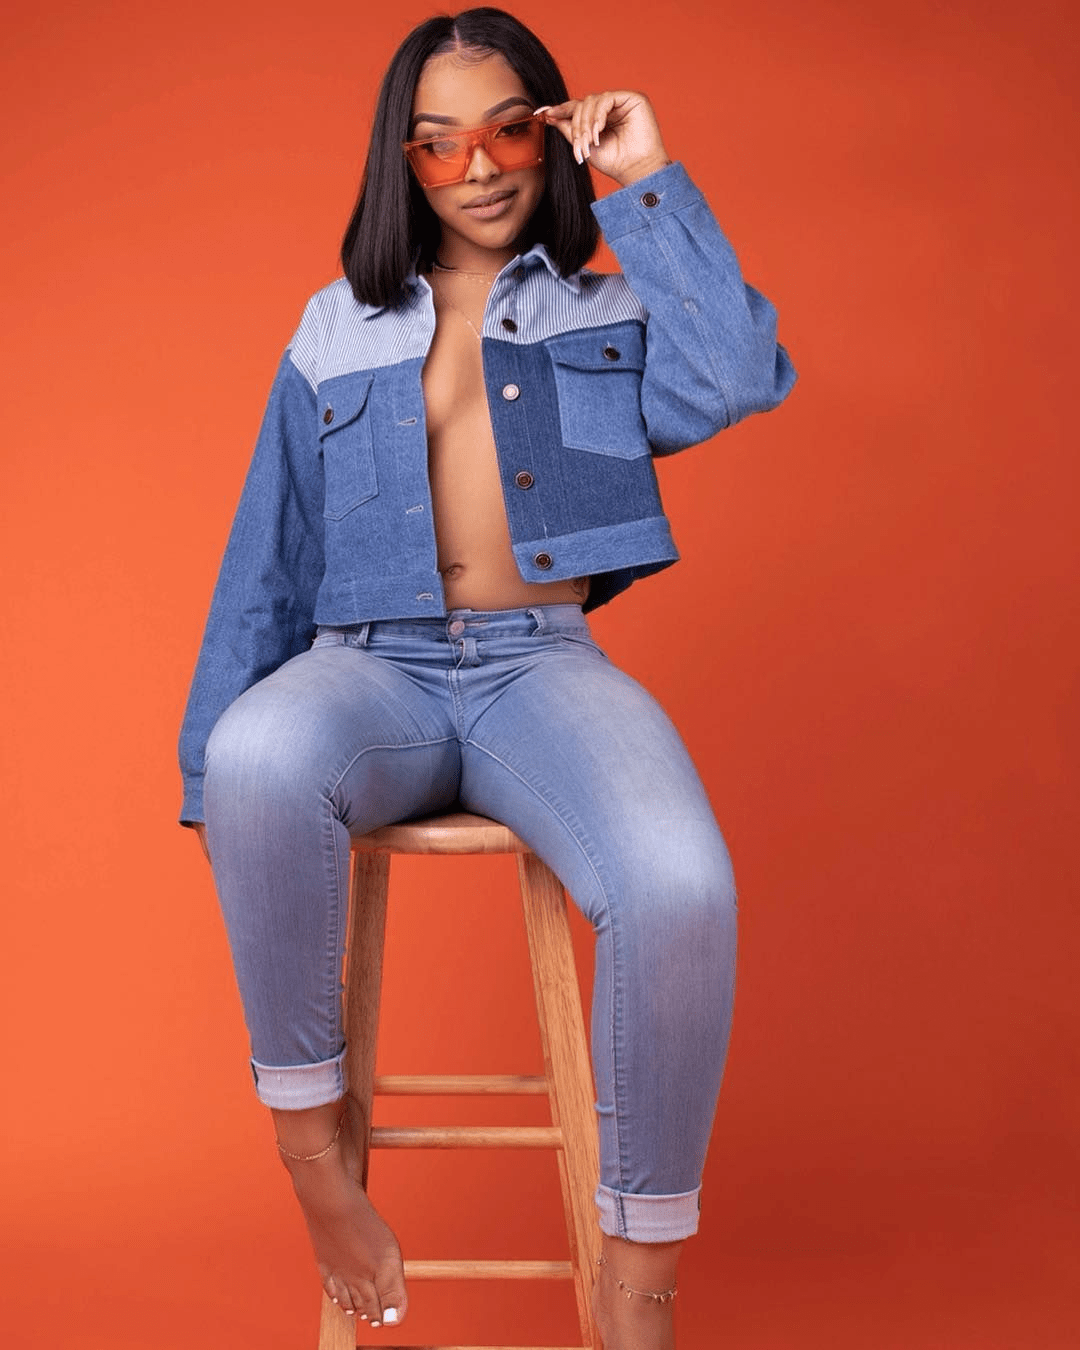 lady wearing hot jean jacket and pants